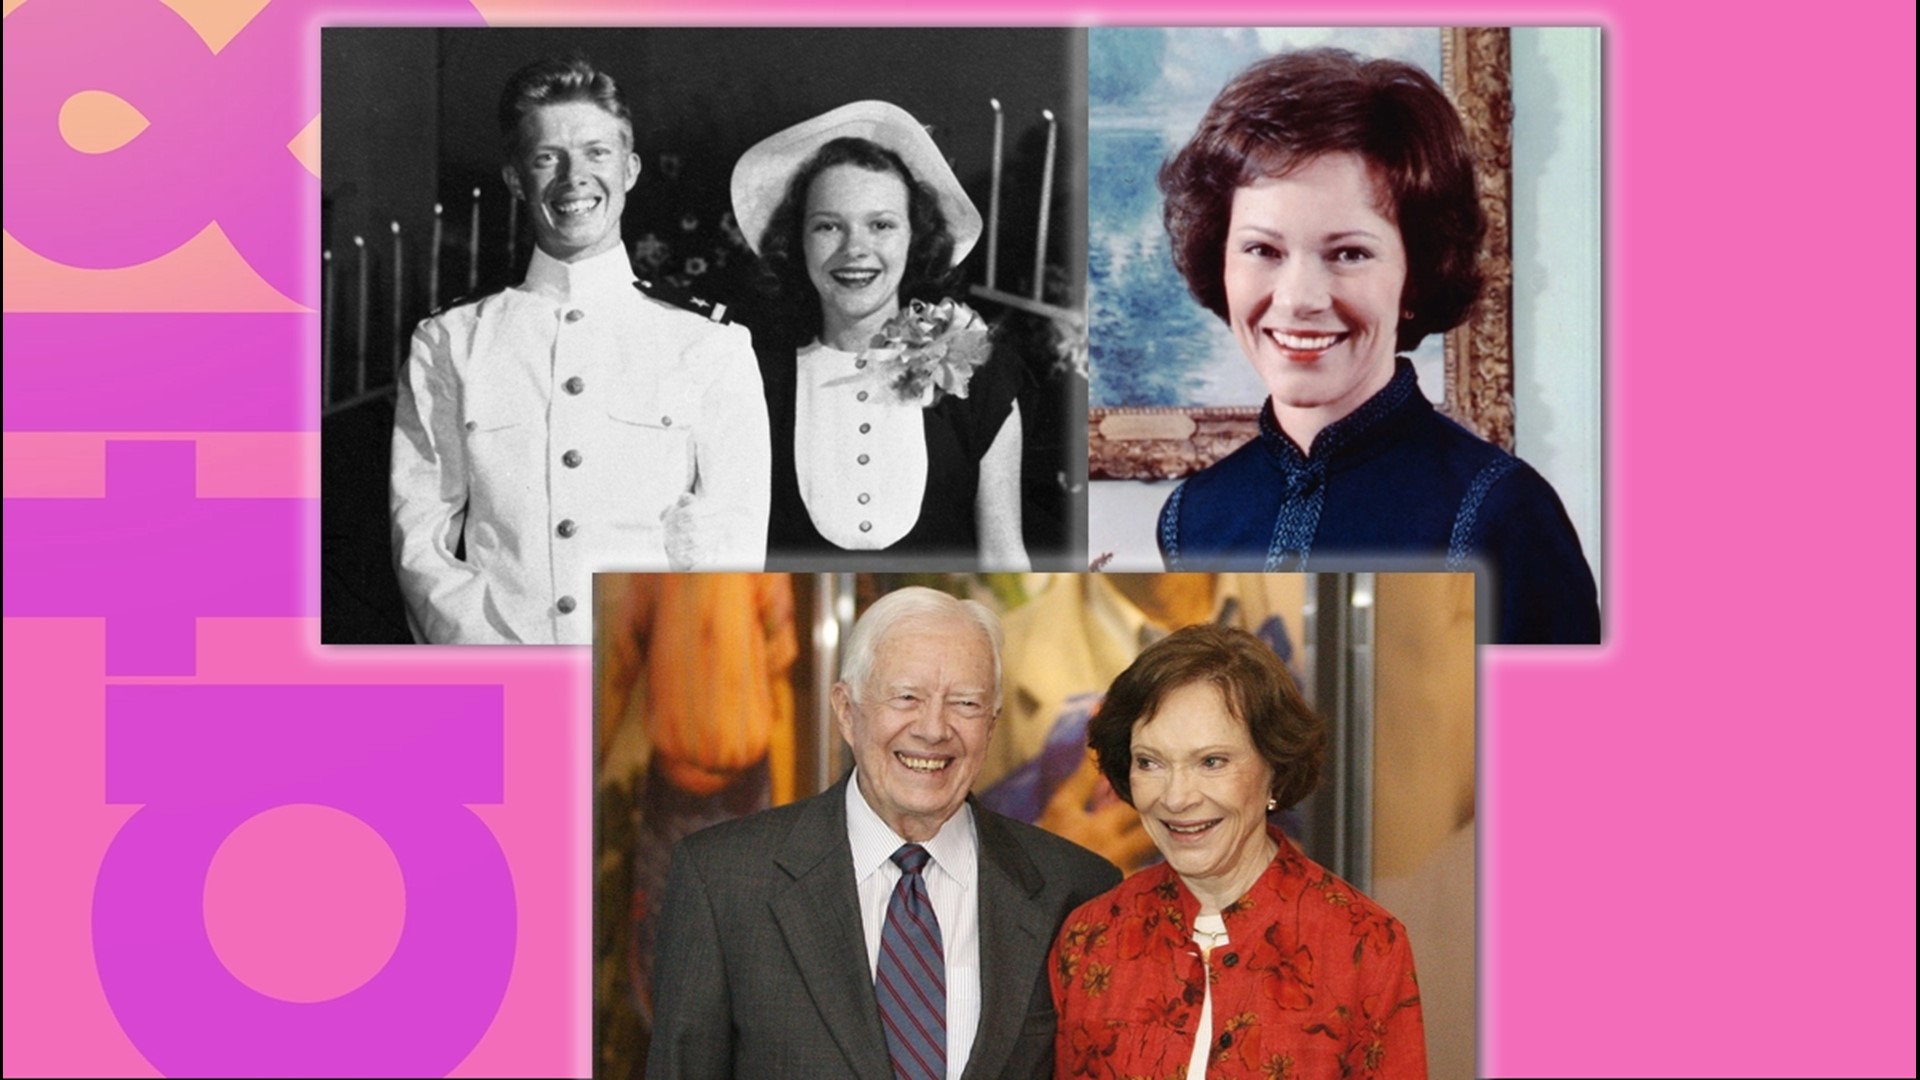 First Lady Rosalynn Carter advocated for mental health reform and is still a big supporter of Habitat for Humanity and a faith-filled member of her church.